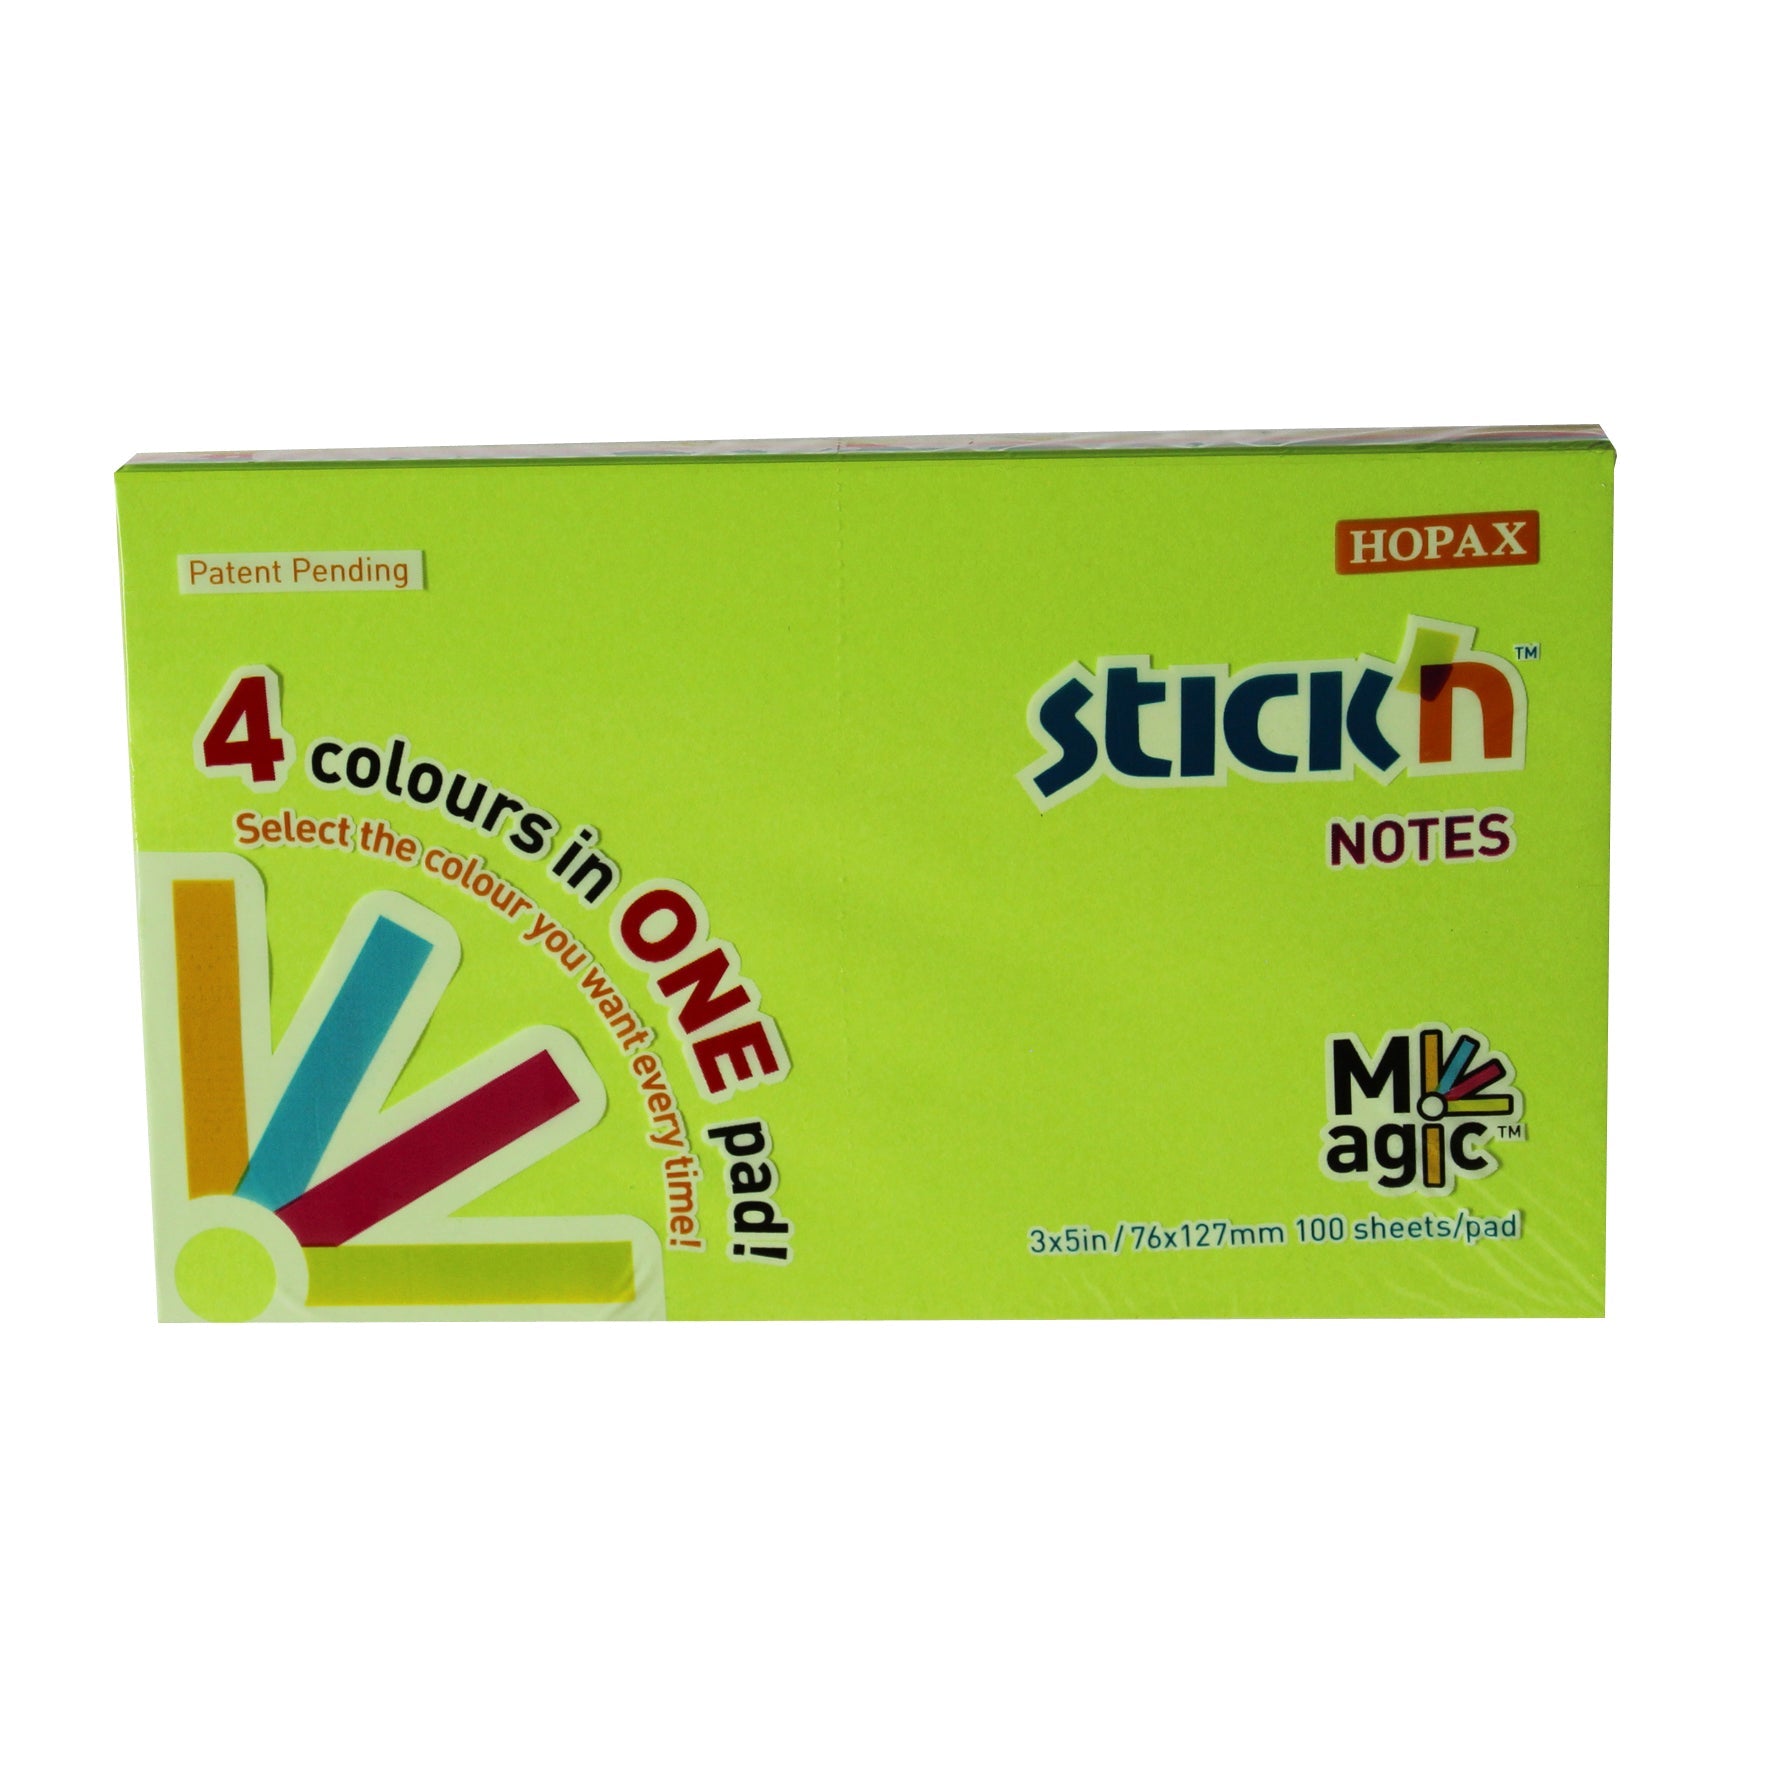 Packaged Stick'n Notes Magic Pad, with the text '4 colours in ONE pad' and the product name. It specifies the pad size as 3x5in (76x127mm) with 100 sheets per pad, and the logo 'HOPAX' in white with a red background.